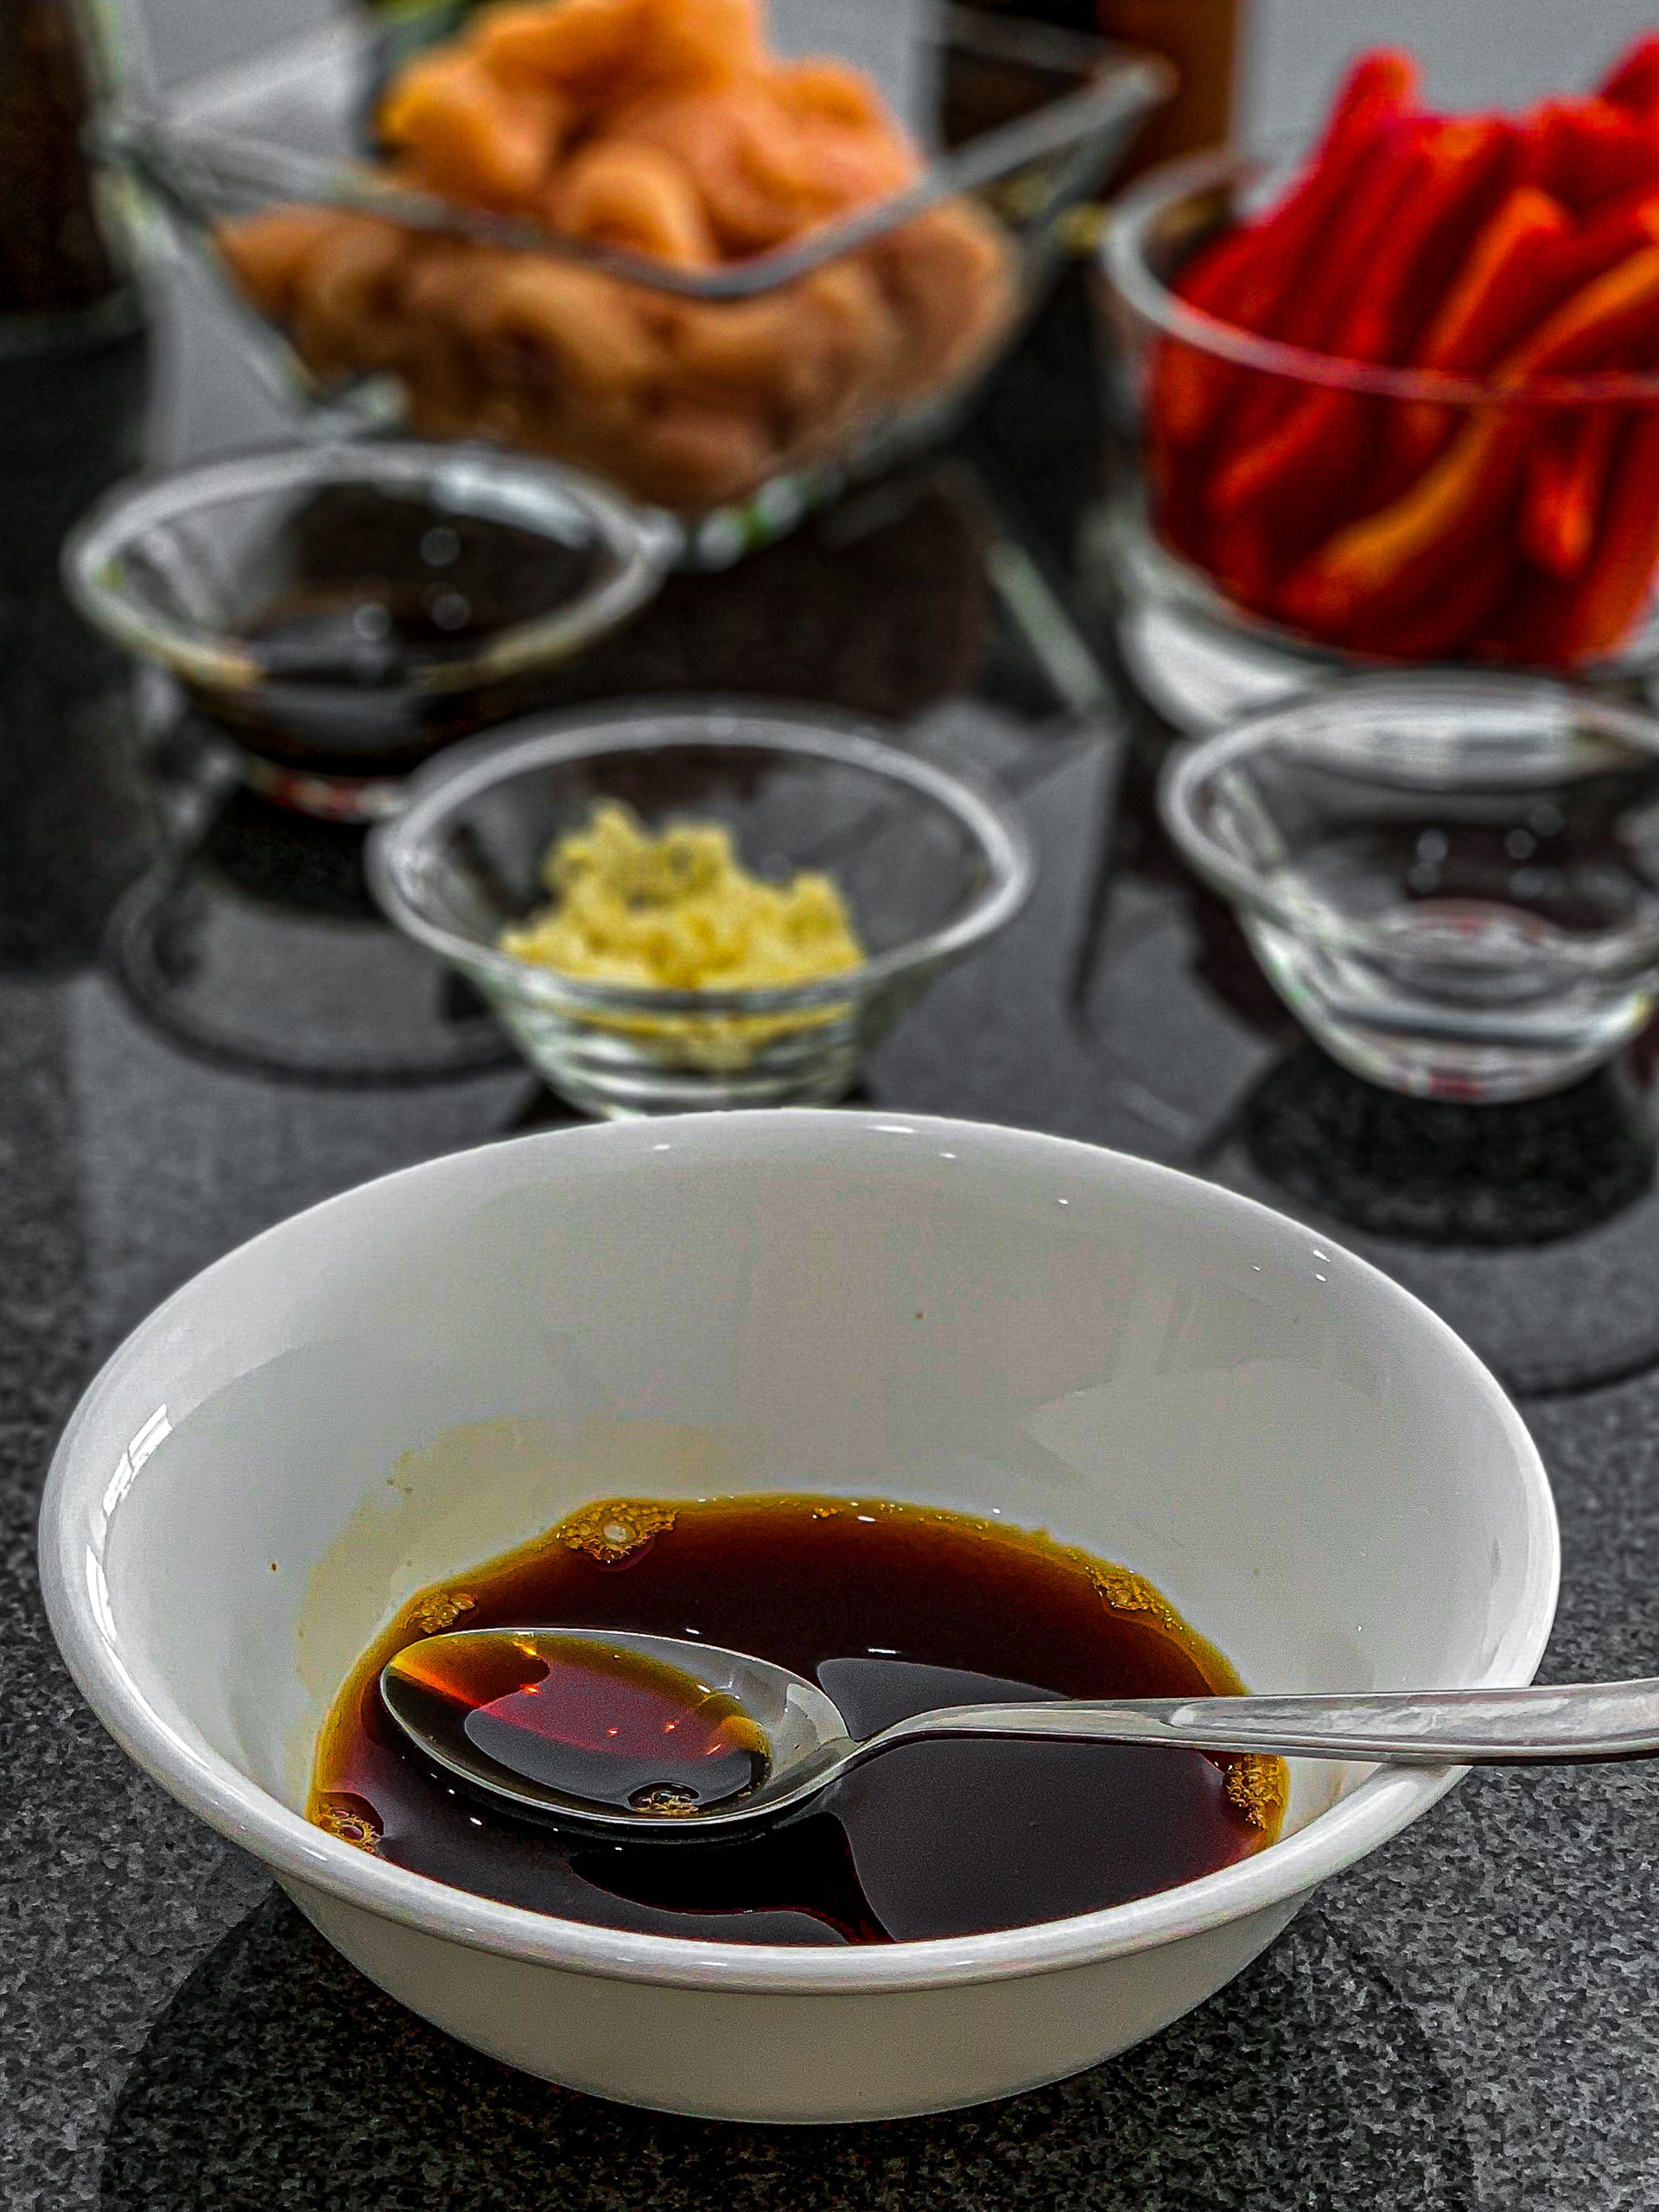 In a medium-sized bowl whisk together half of the soy sauce (1 ½ tbsp), half of the vinegar (1 ½ tbsp), and the honey.